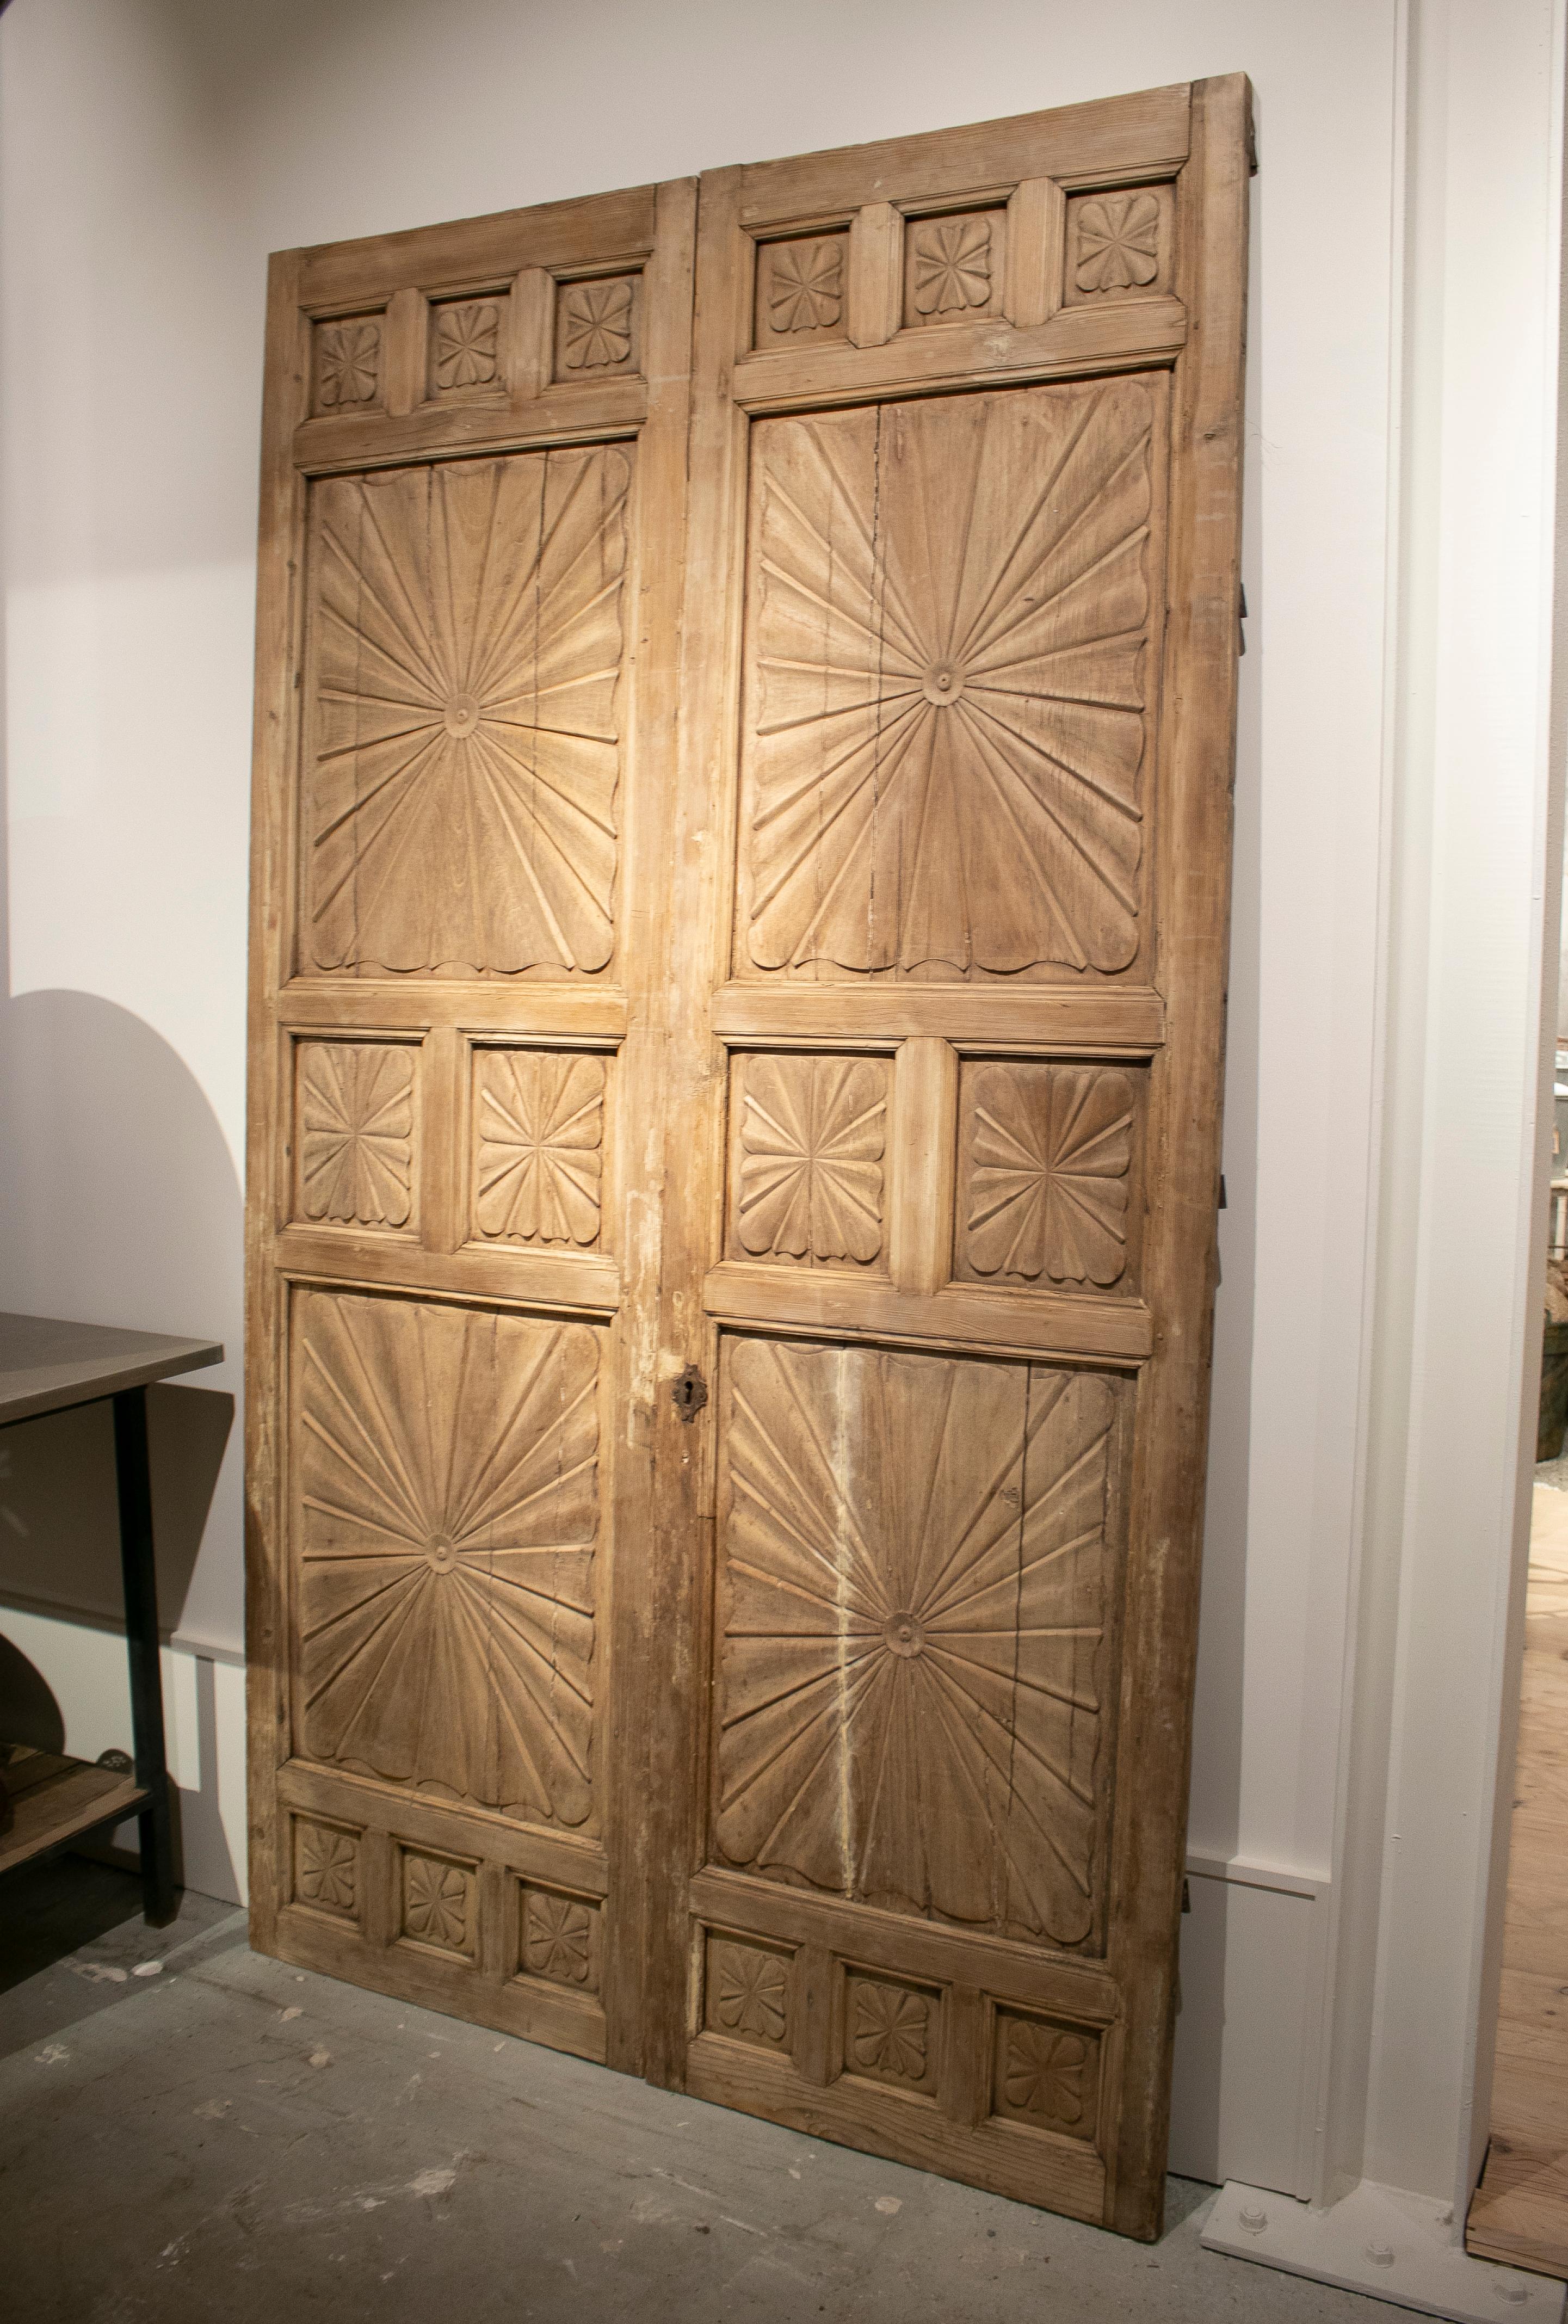 18th century Spanish hand carved wooden panelled double door.